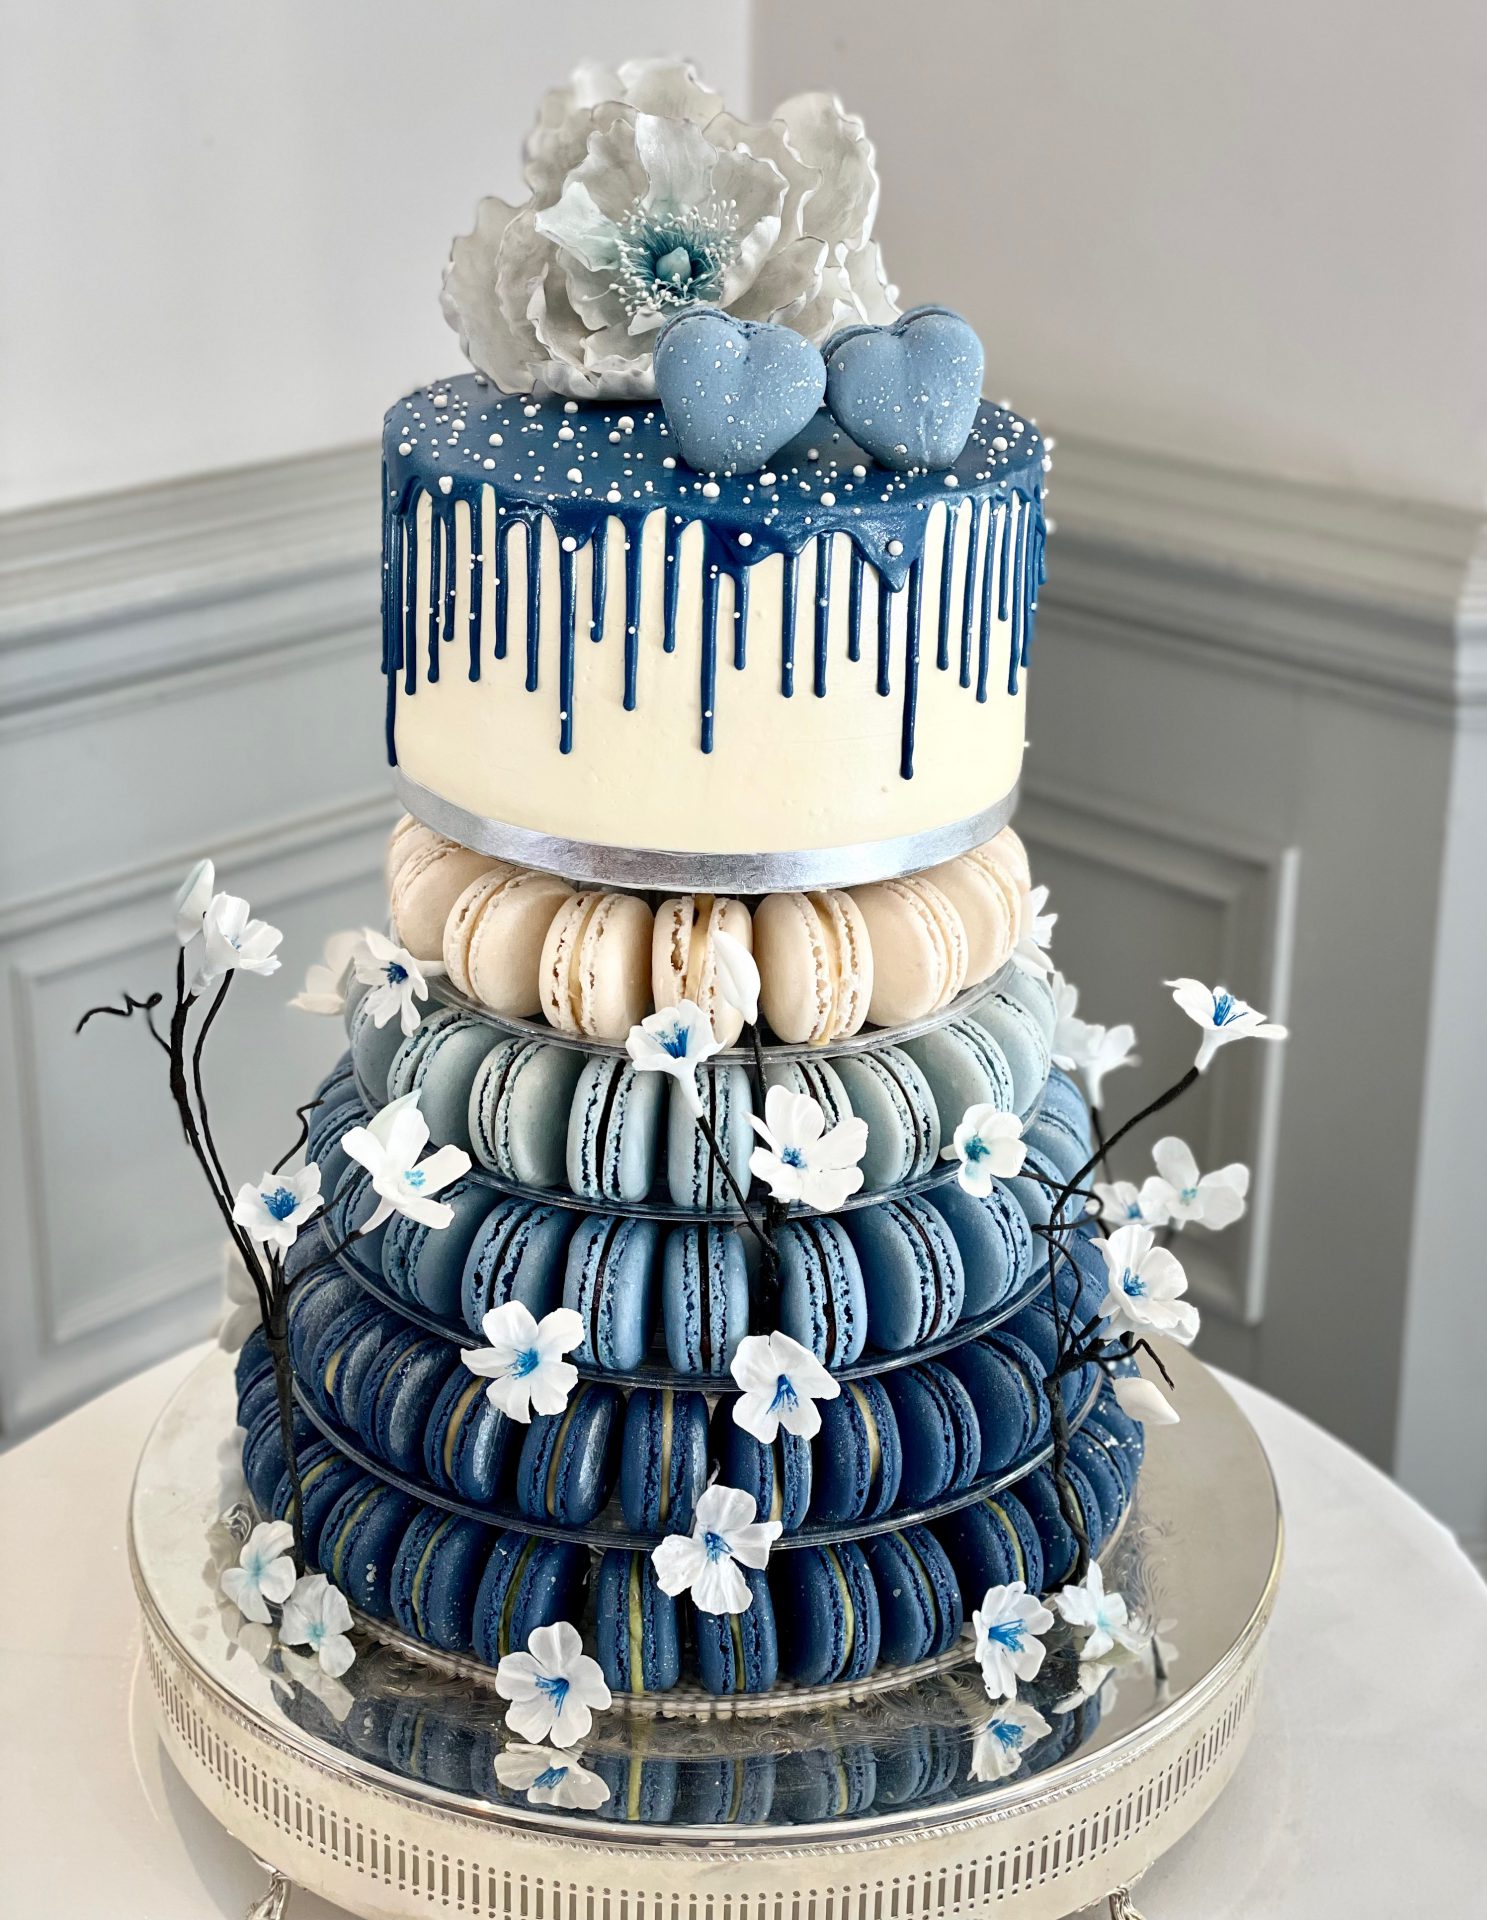 Details more than 125 macaron tower wedding cake latest - in.eteachers